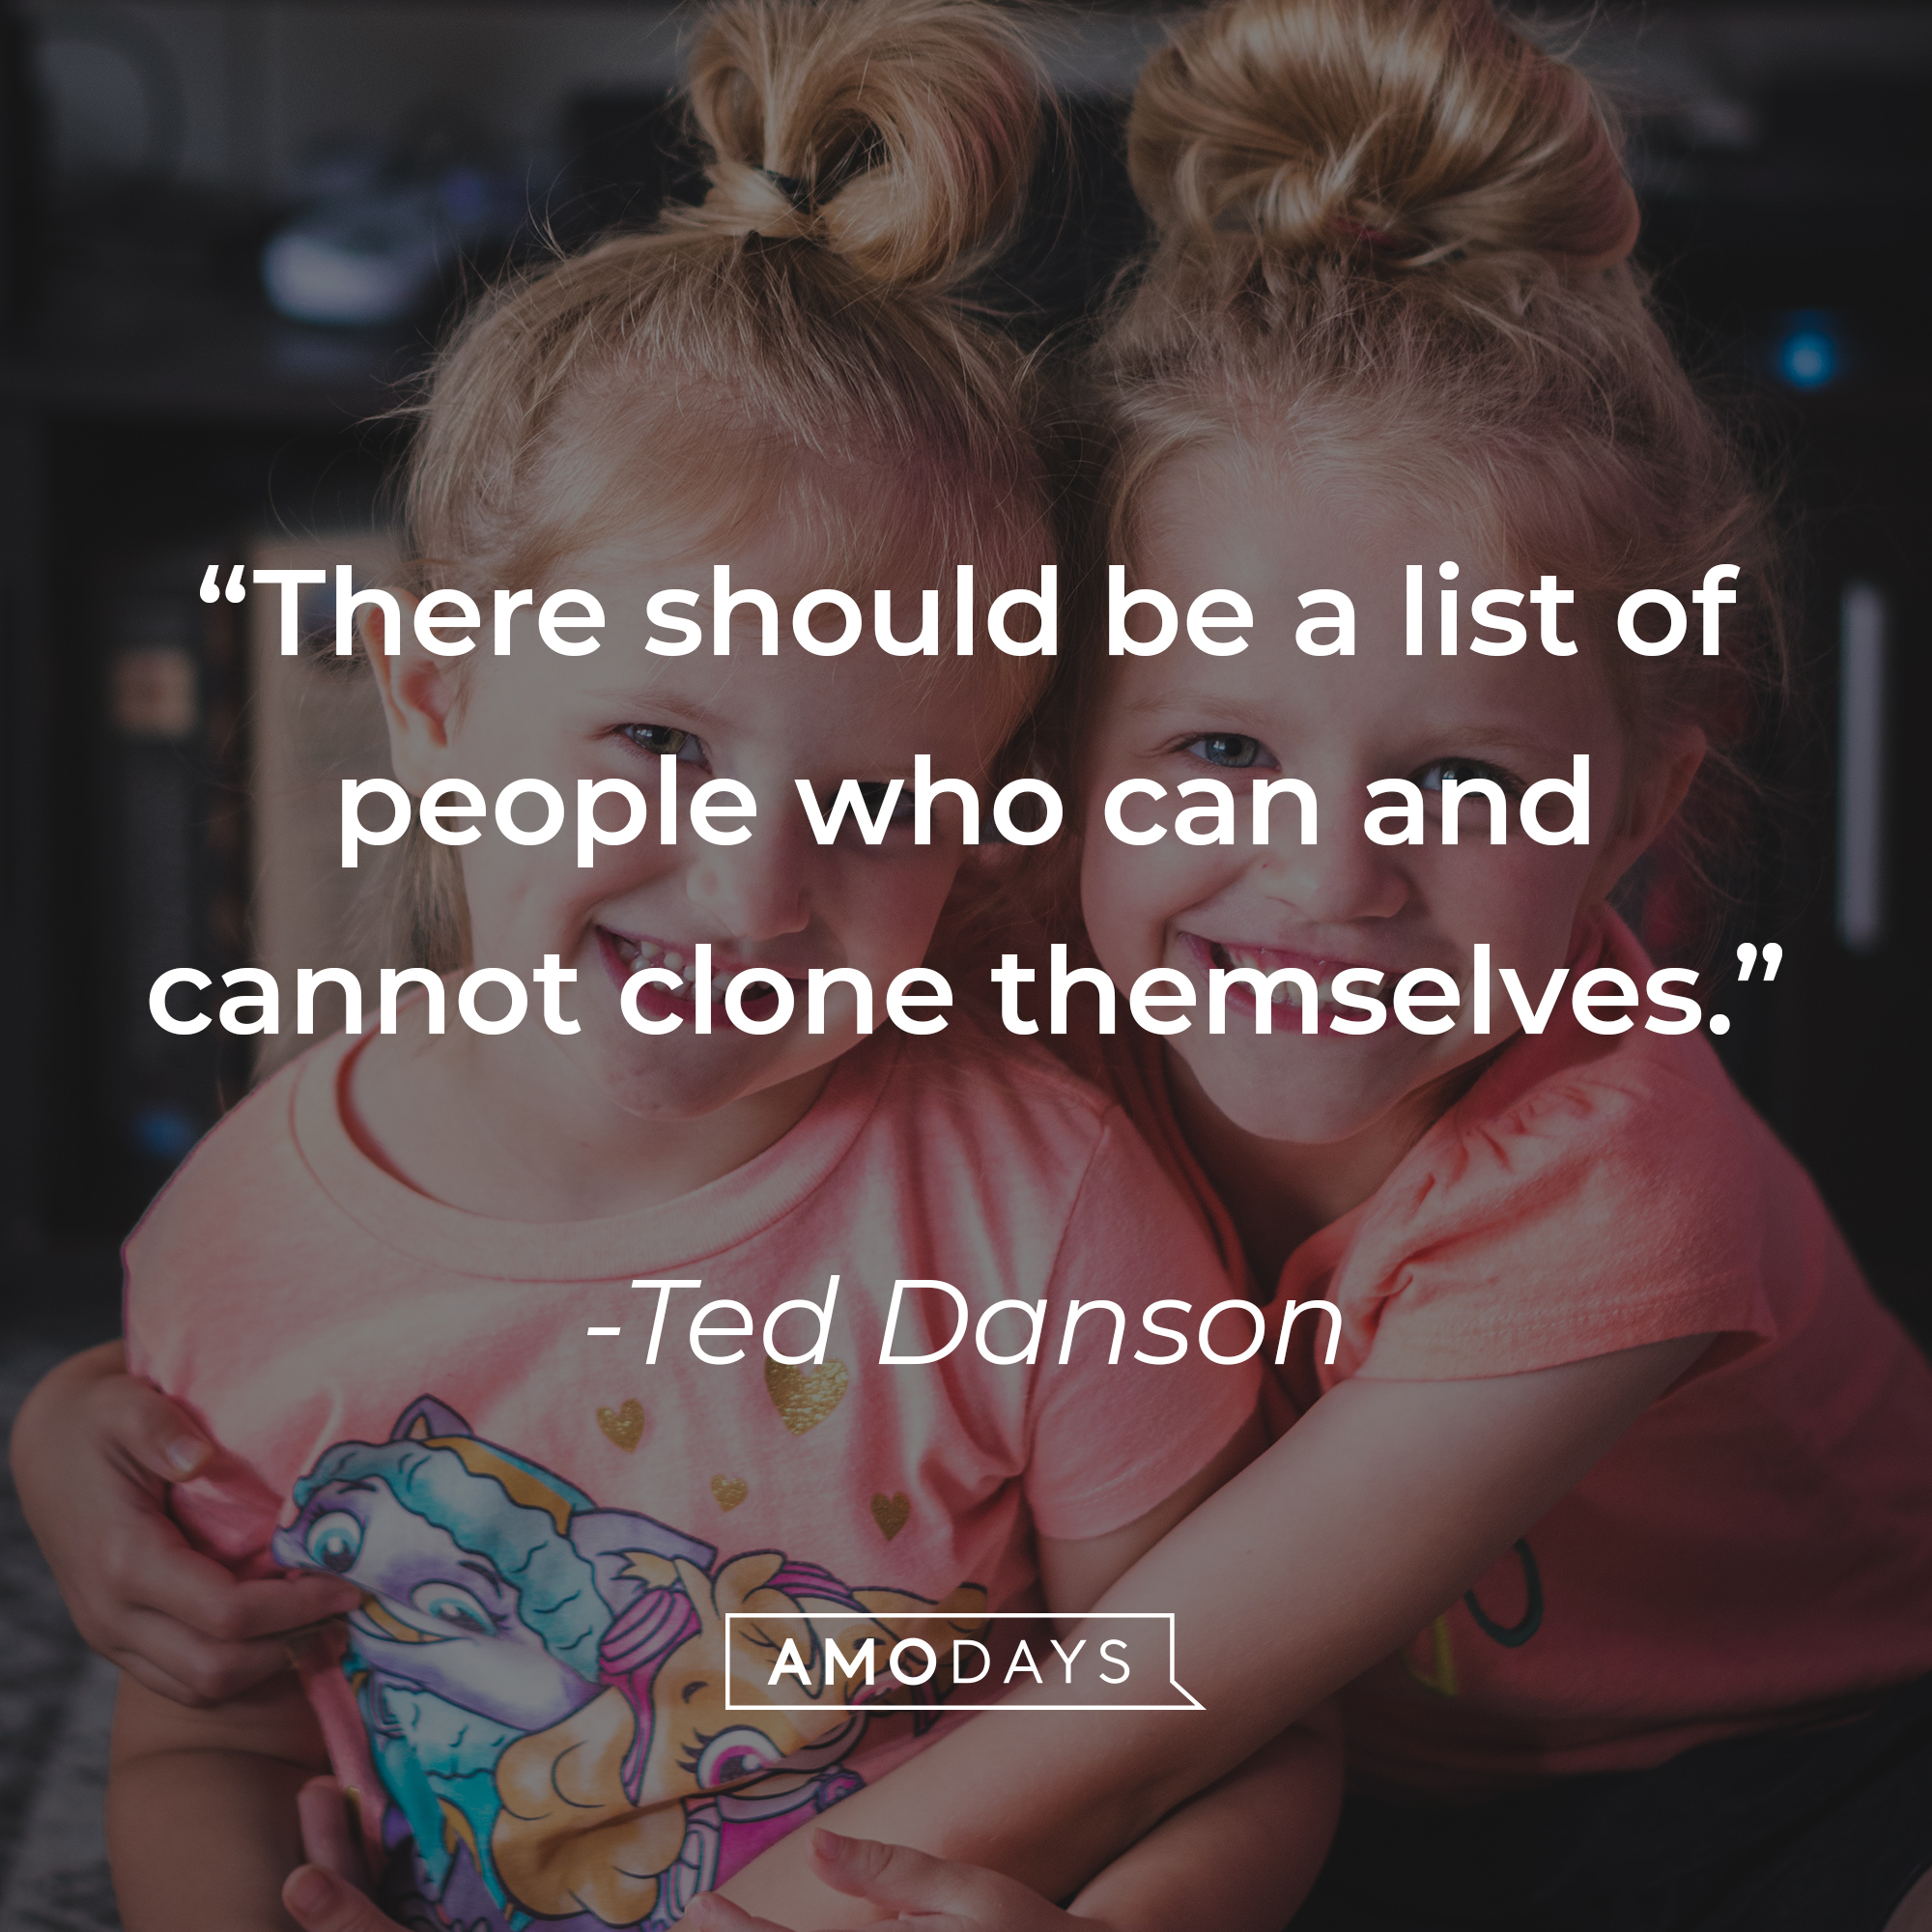 Ted Danson's quote, "There should be a list of people who can and cannot clone themselves." | Image: Unsplash.com